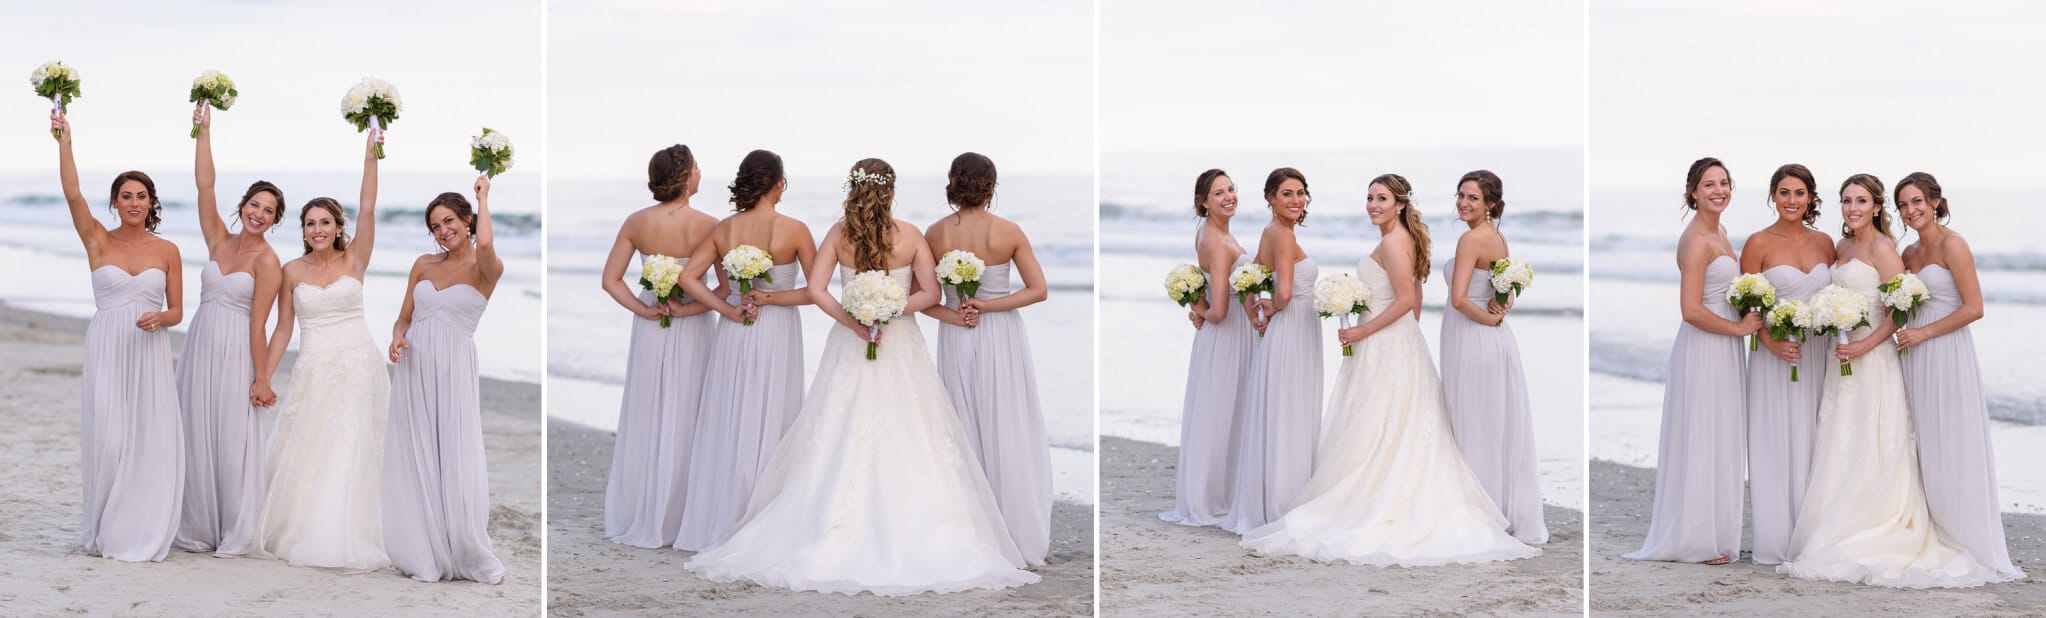 Fun pictures with the bridesmaids at North Beach Plantation